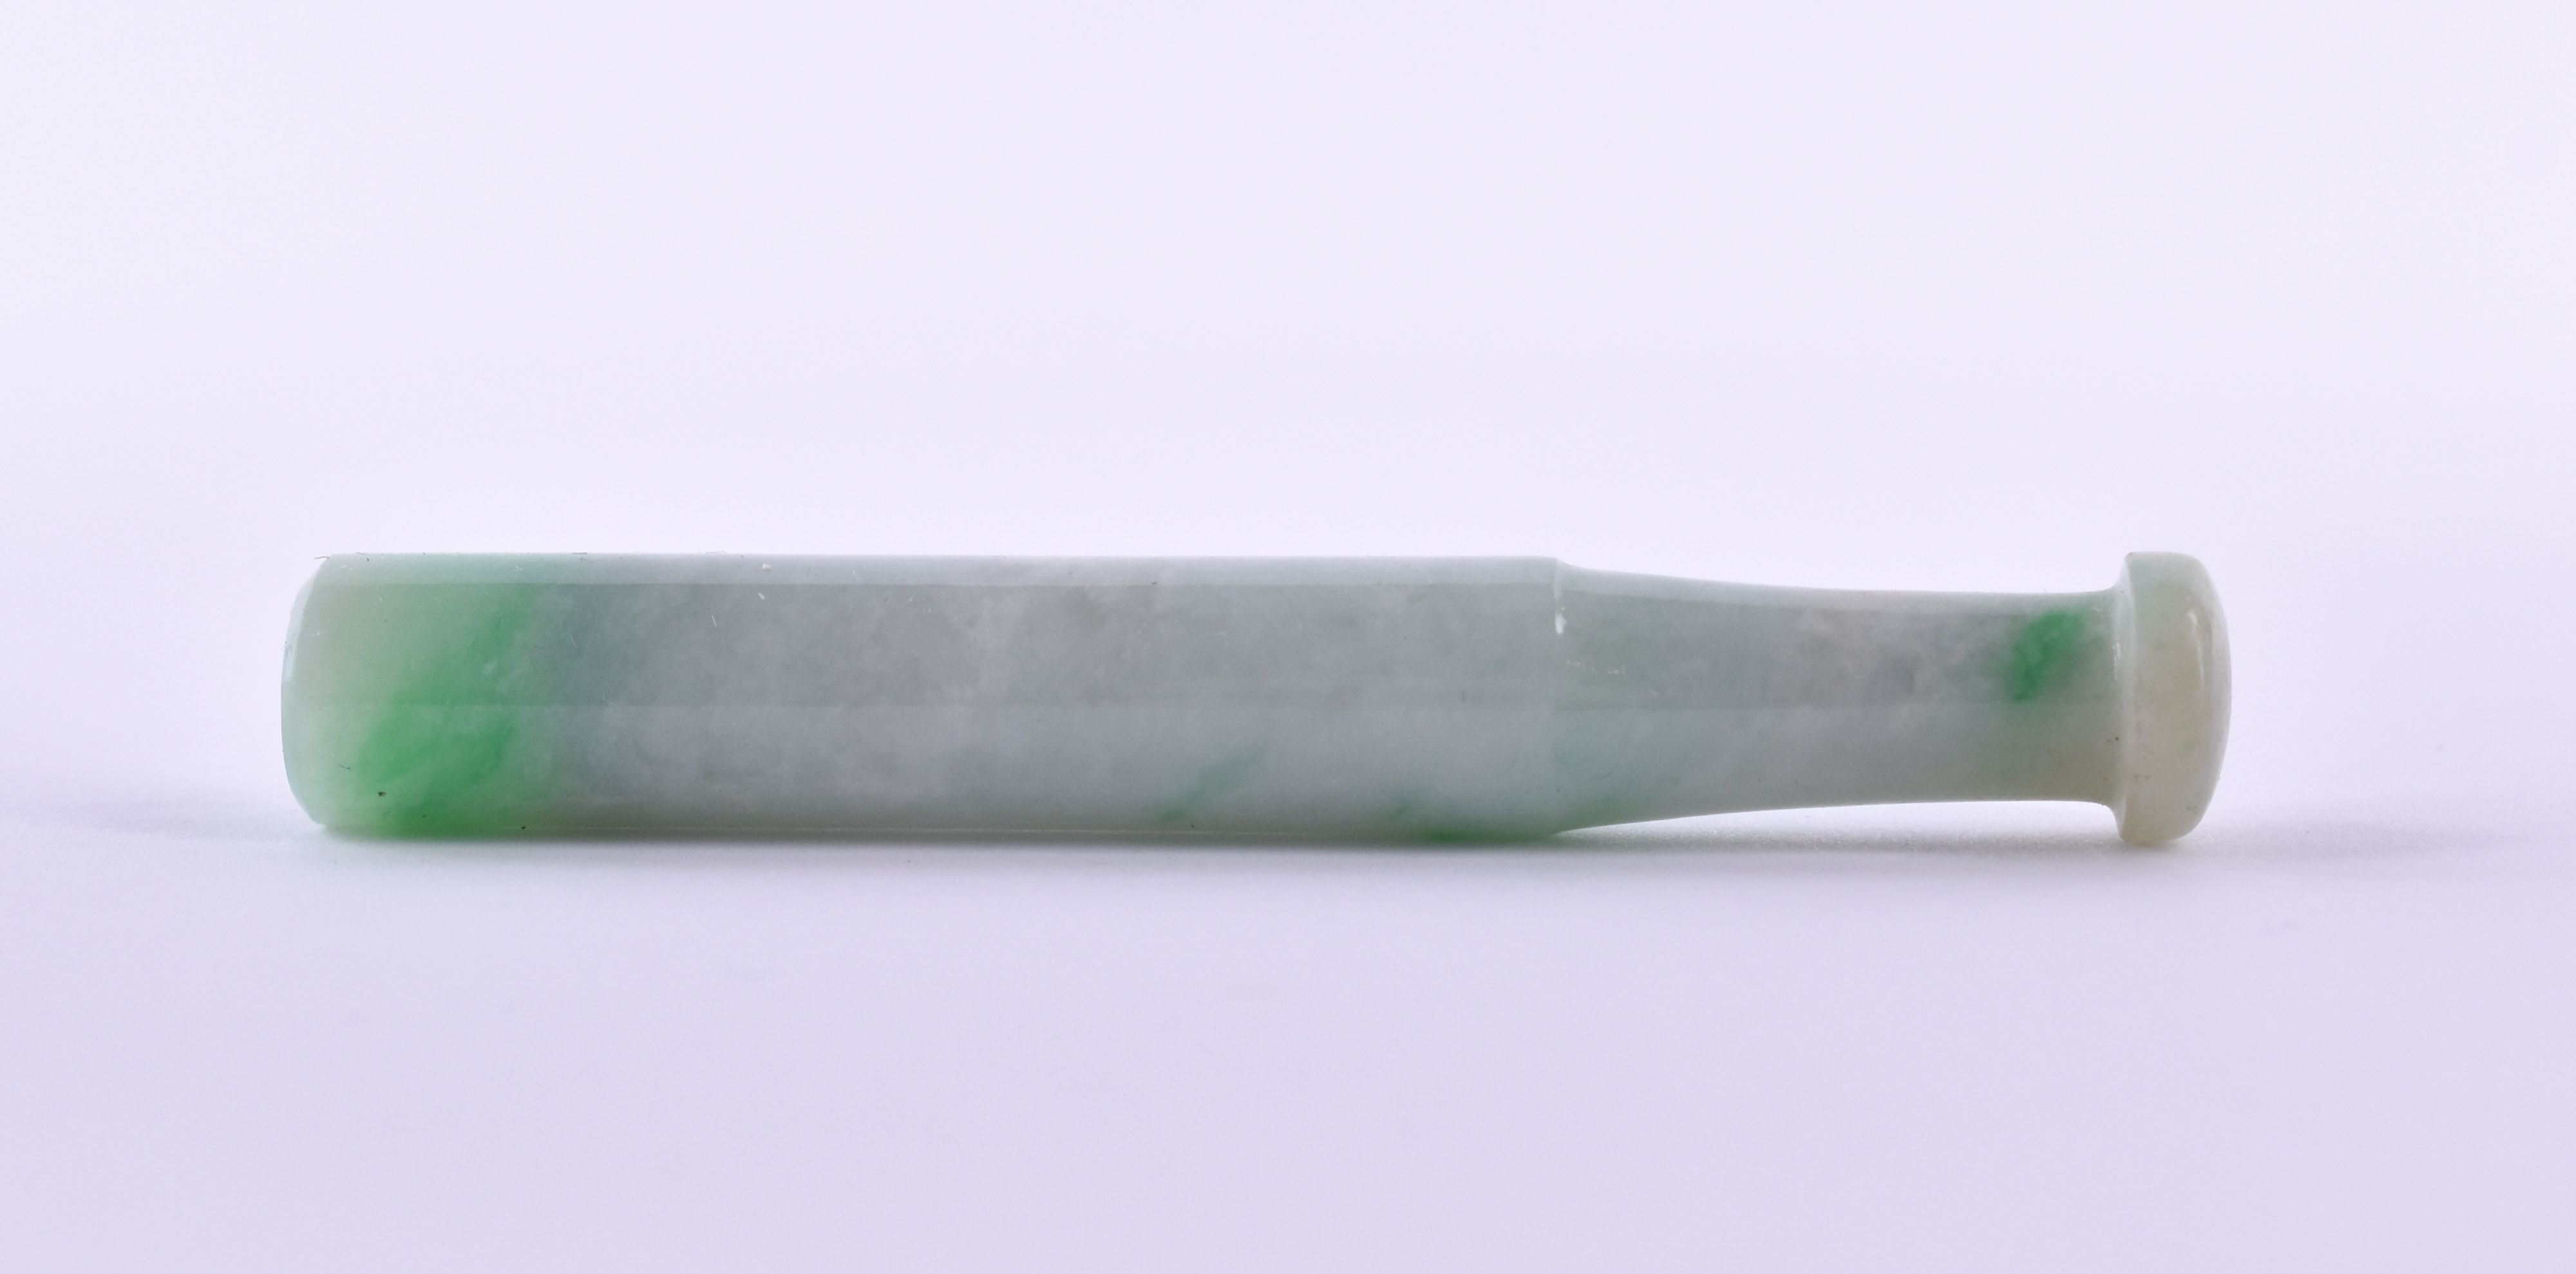  Pipe mouthpiece China Qing dynasty - Image 2 of 6